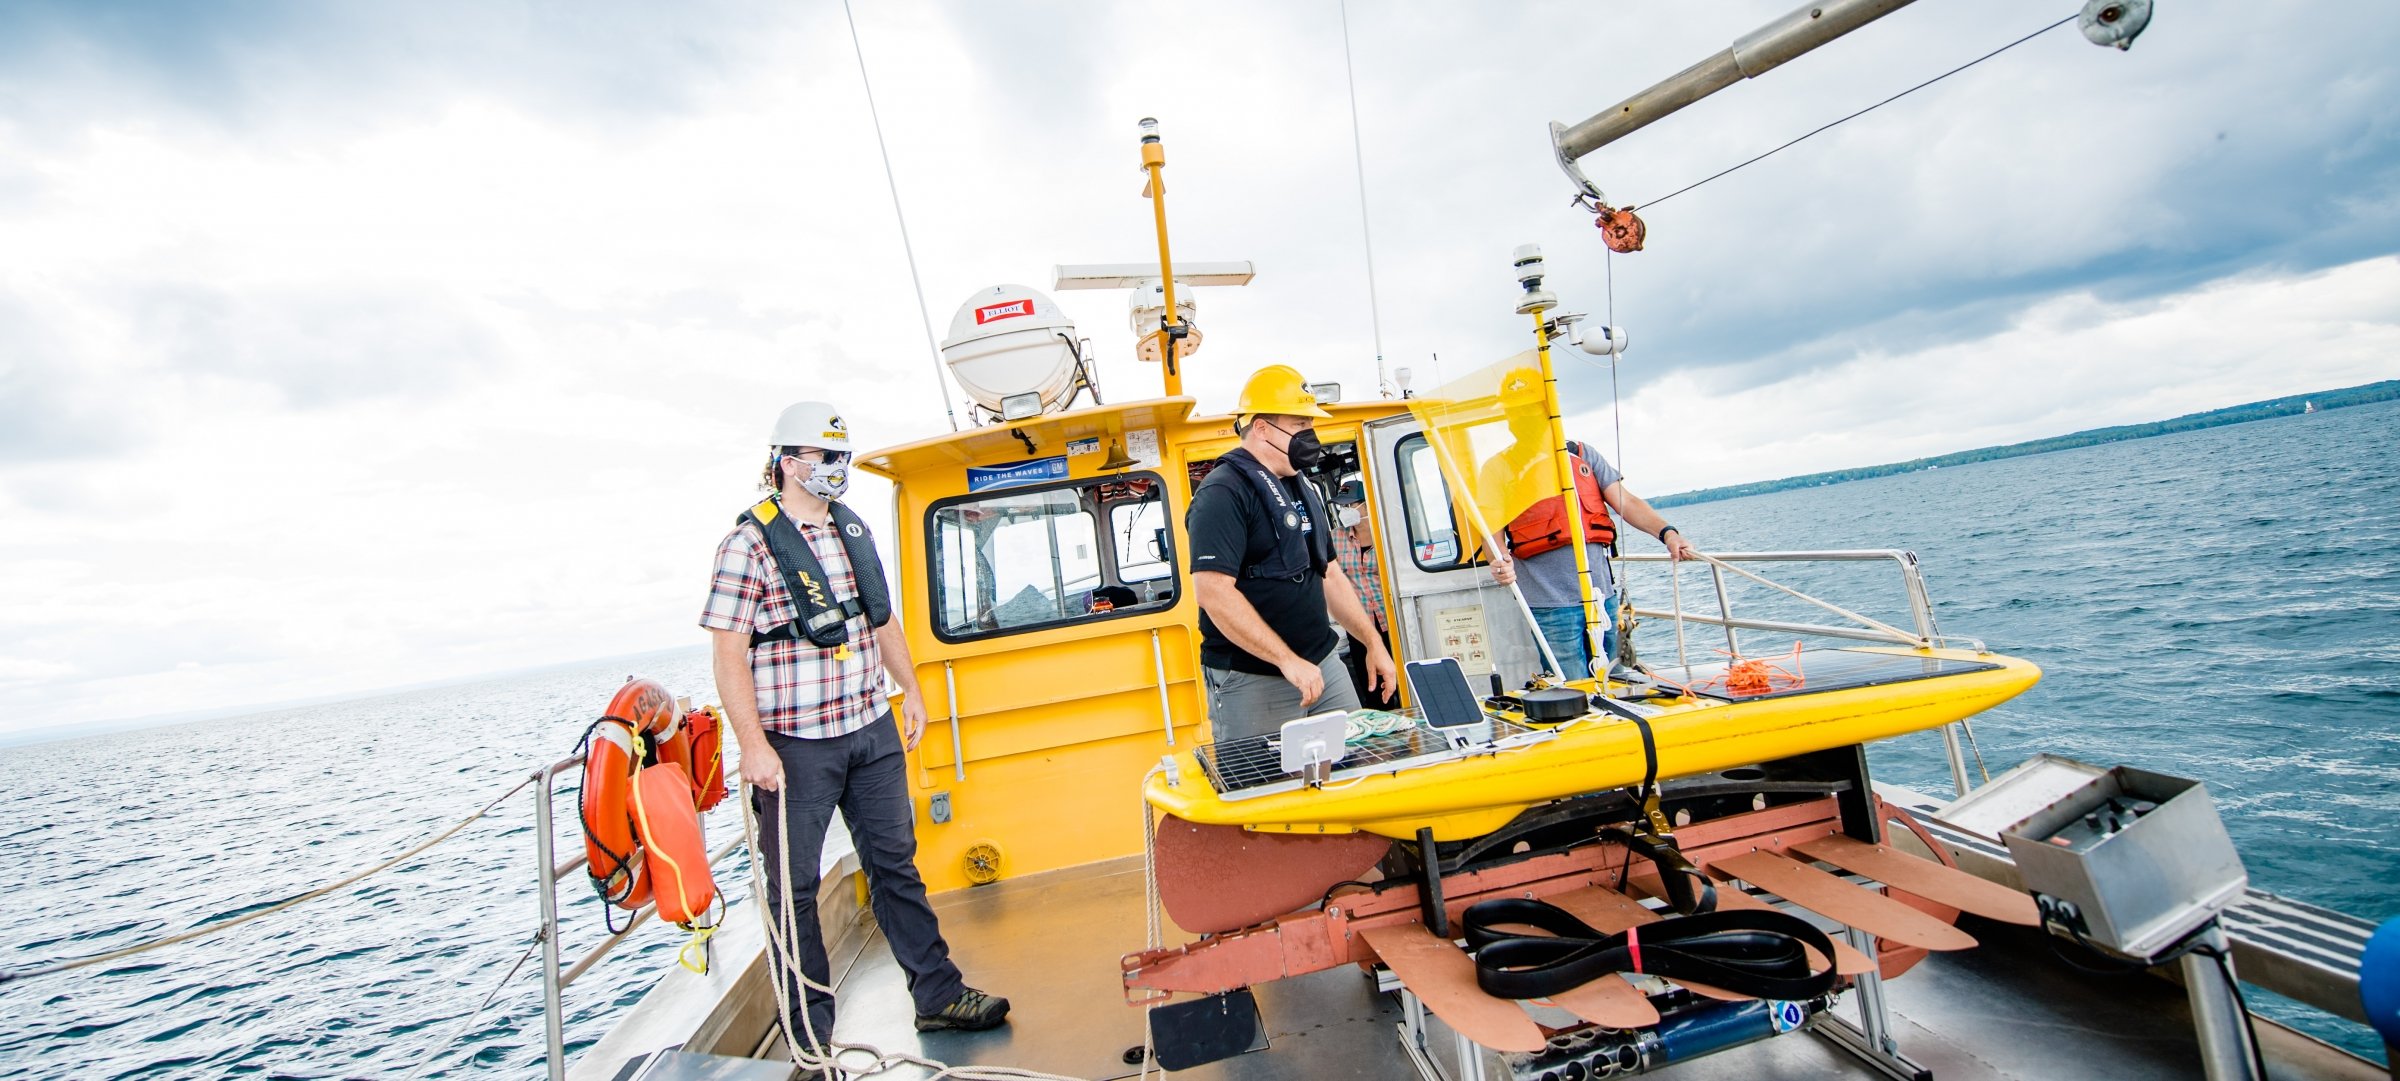 Researchers on the RV Agassiz